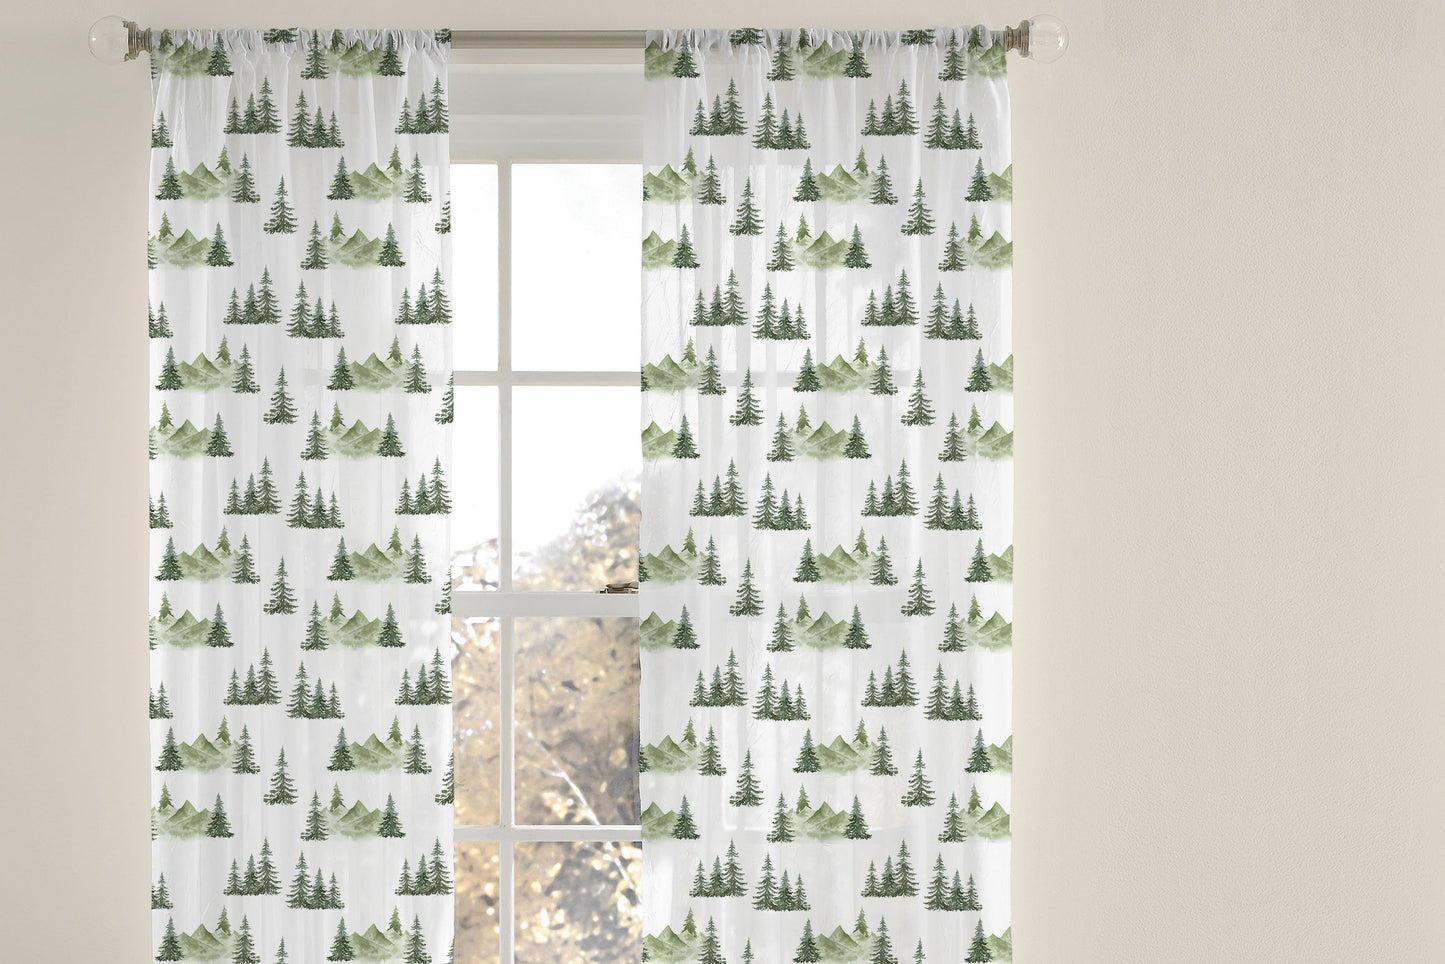 Pine Tree Mountains Sheer Curtain single panel, Forest nursery curtain - Enchanted Green